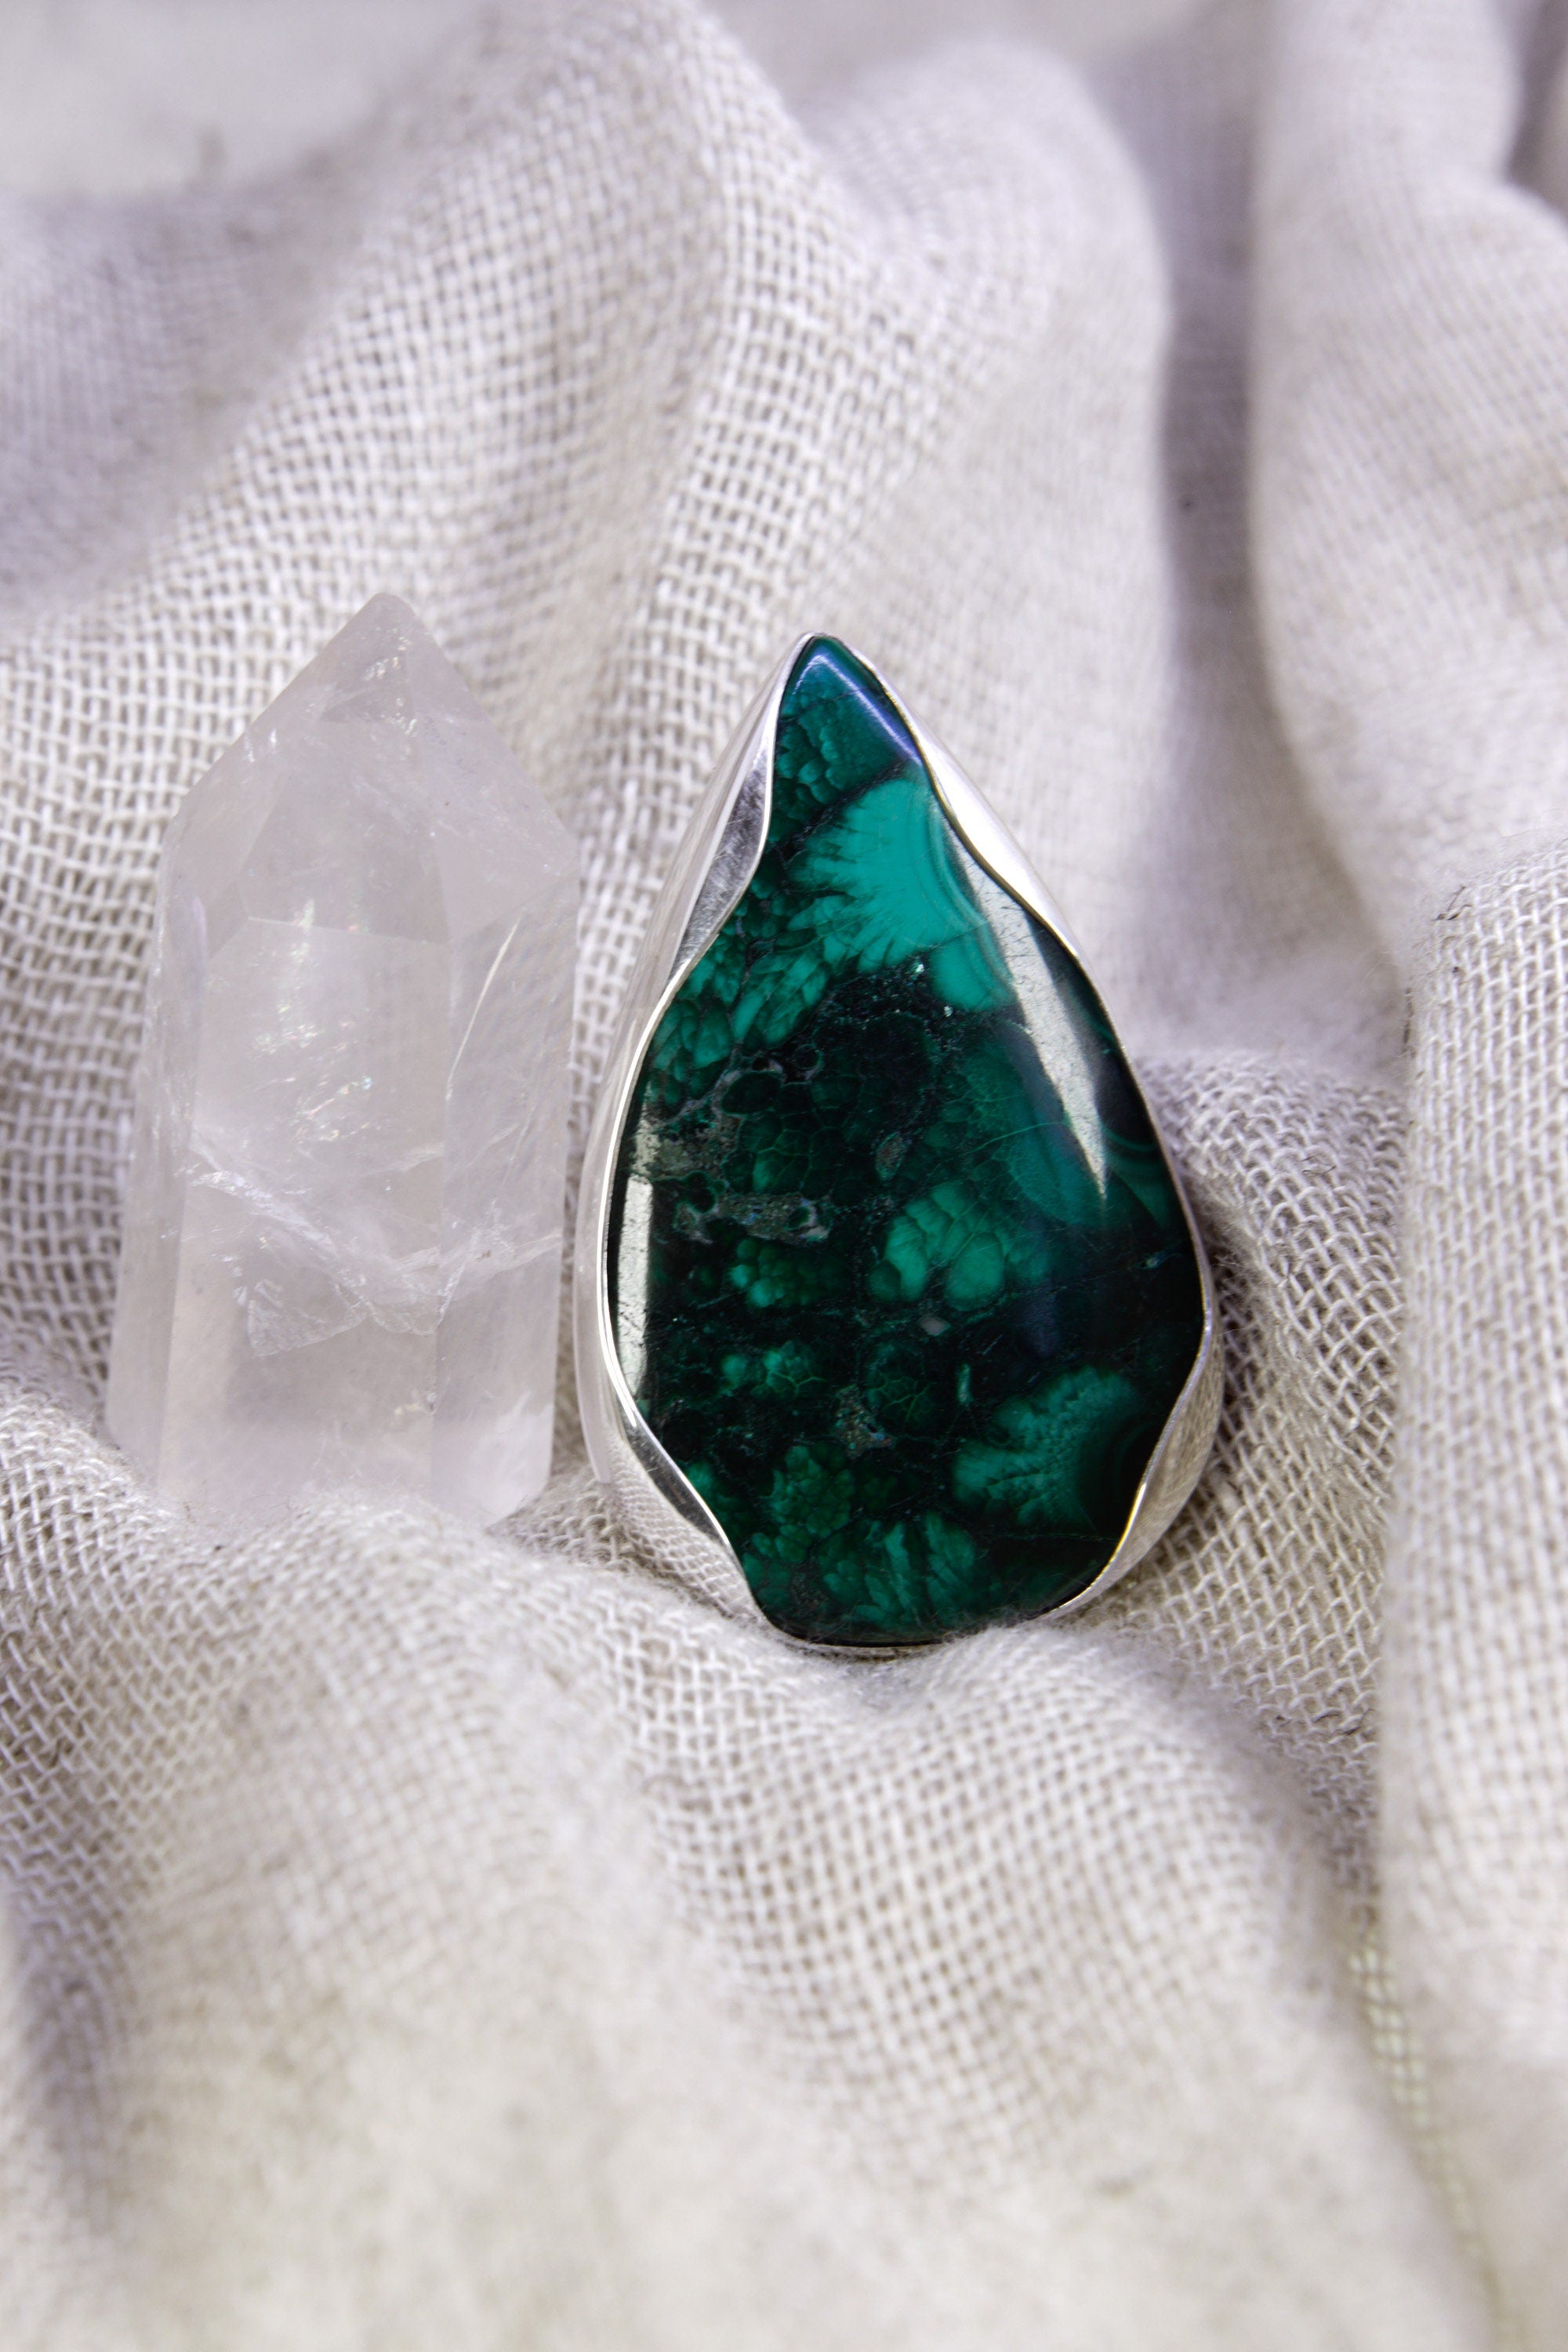 A Sturdy Embrace of Earthly Resonance: Adjustable Sterling Silver Ring with Teardrop Malachite - Unisex - Size 5-12 US